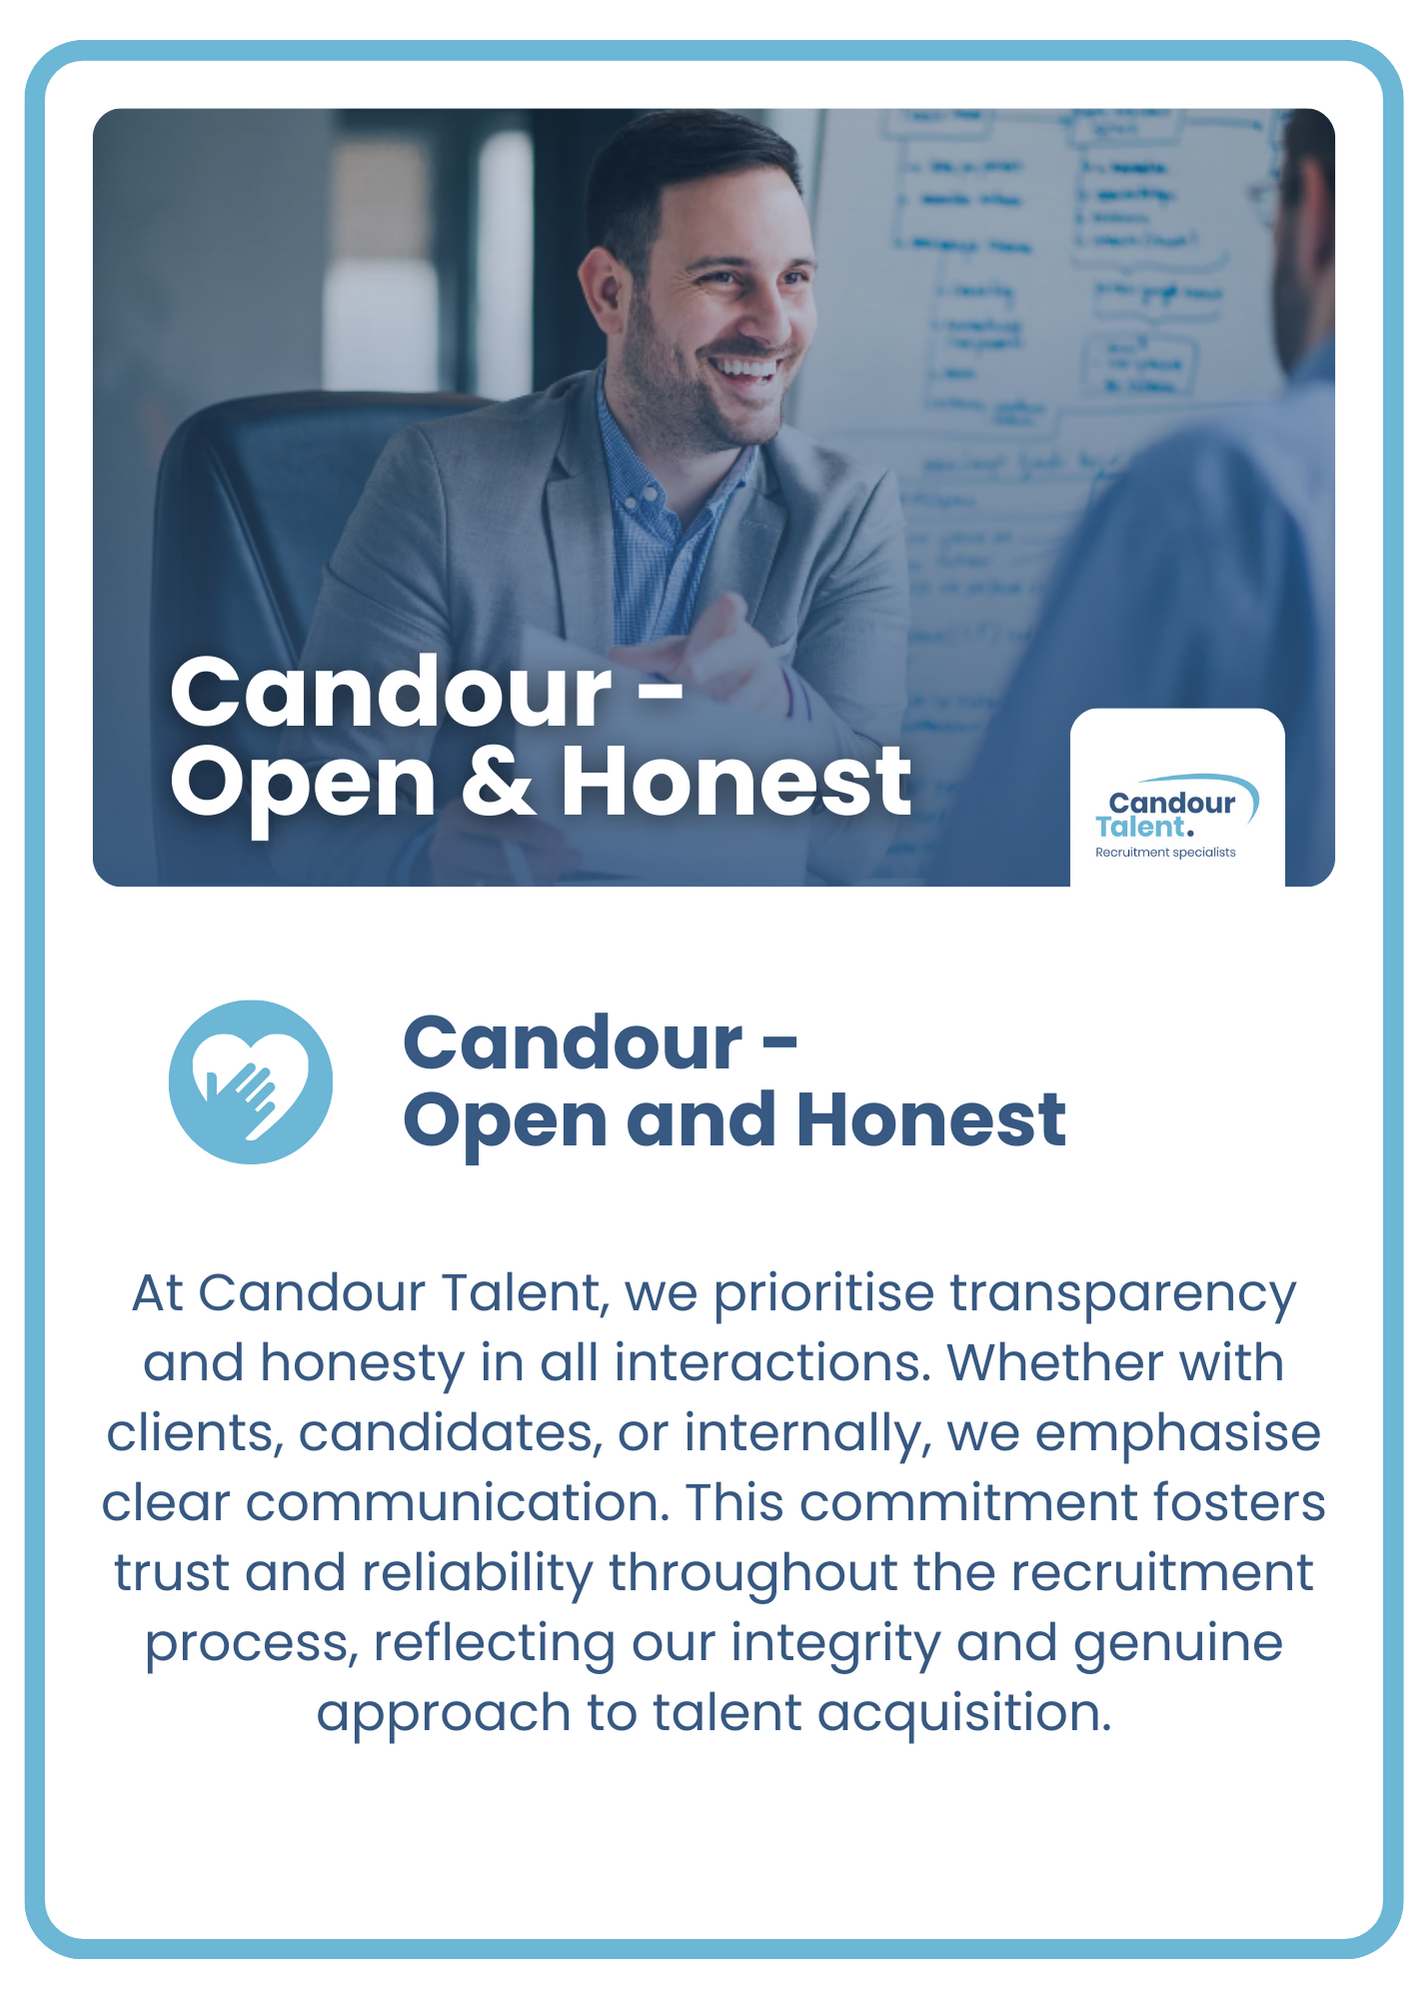 Candour Talent Recruitment Agency - Our Values page - Candour Talent Open and Honest Photo. The image is followed by the text: 'At Candour Talent, we prioritise transparency and honesty in all interactions. Whether with clients, candidates, or internally, we emphasize clear communication. This commitment fosters trust and reliability throughout the recruitment process, reflecting our integrity and genuine approach to talent acquisition.